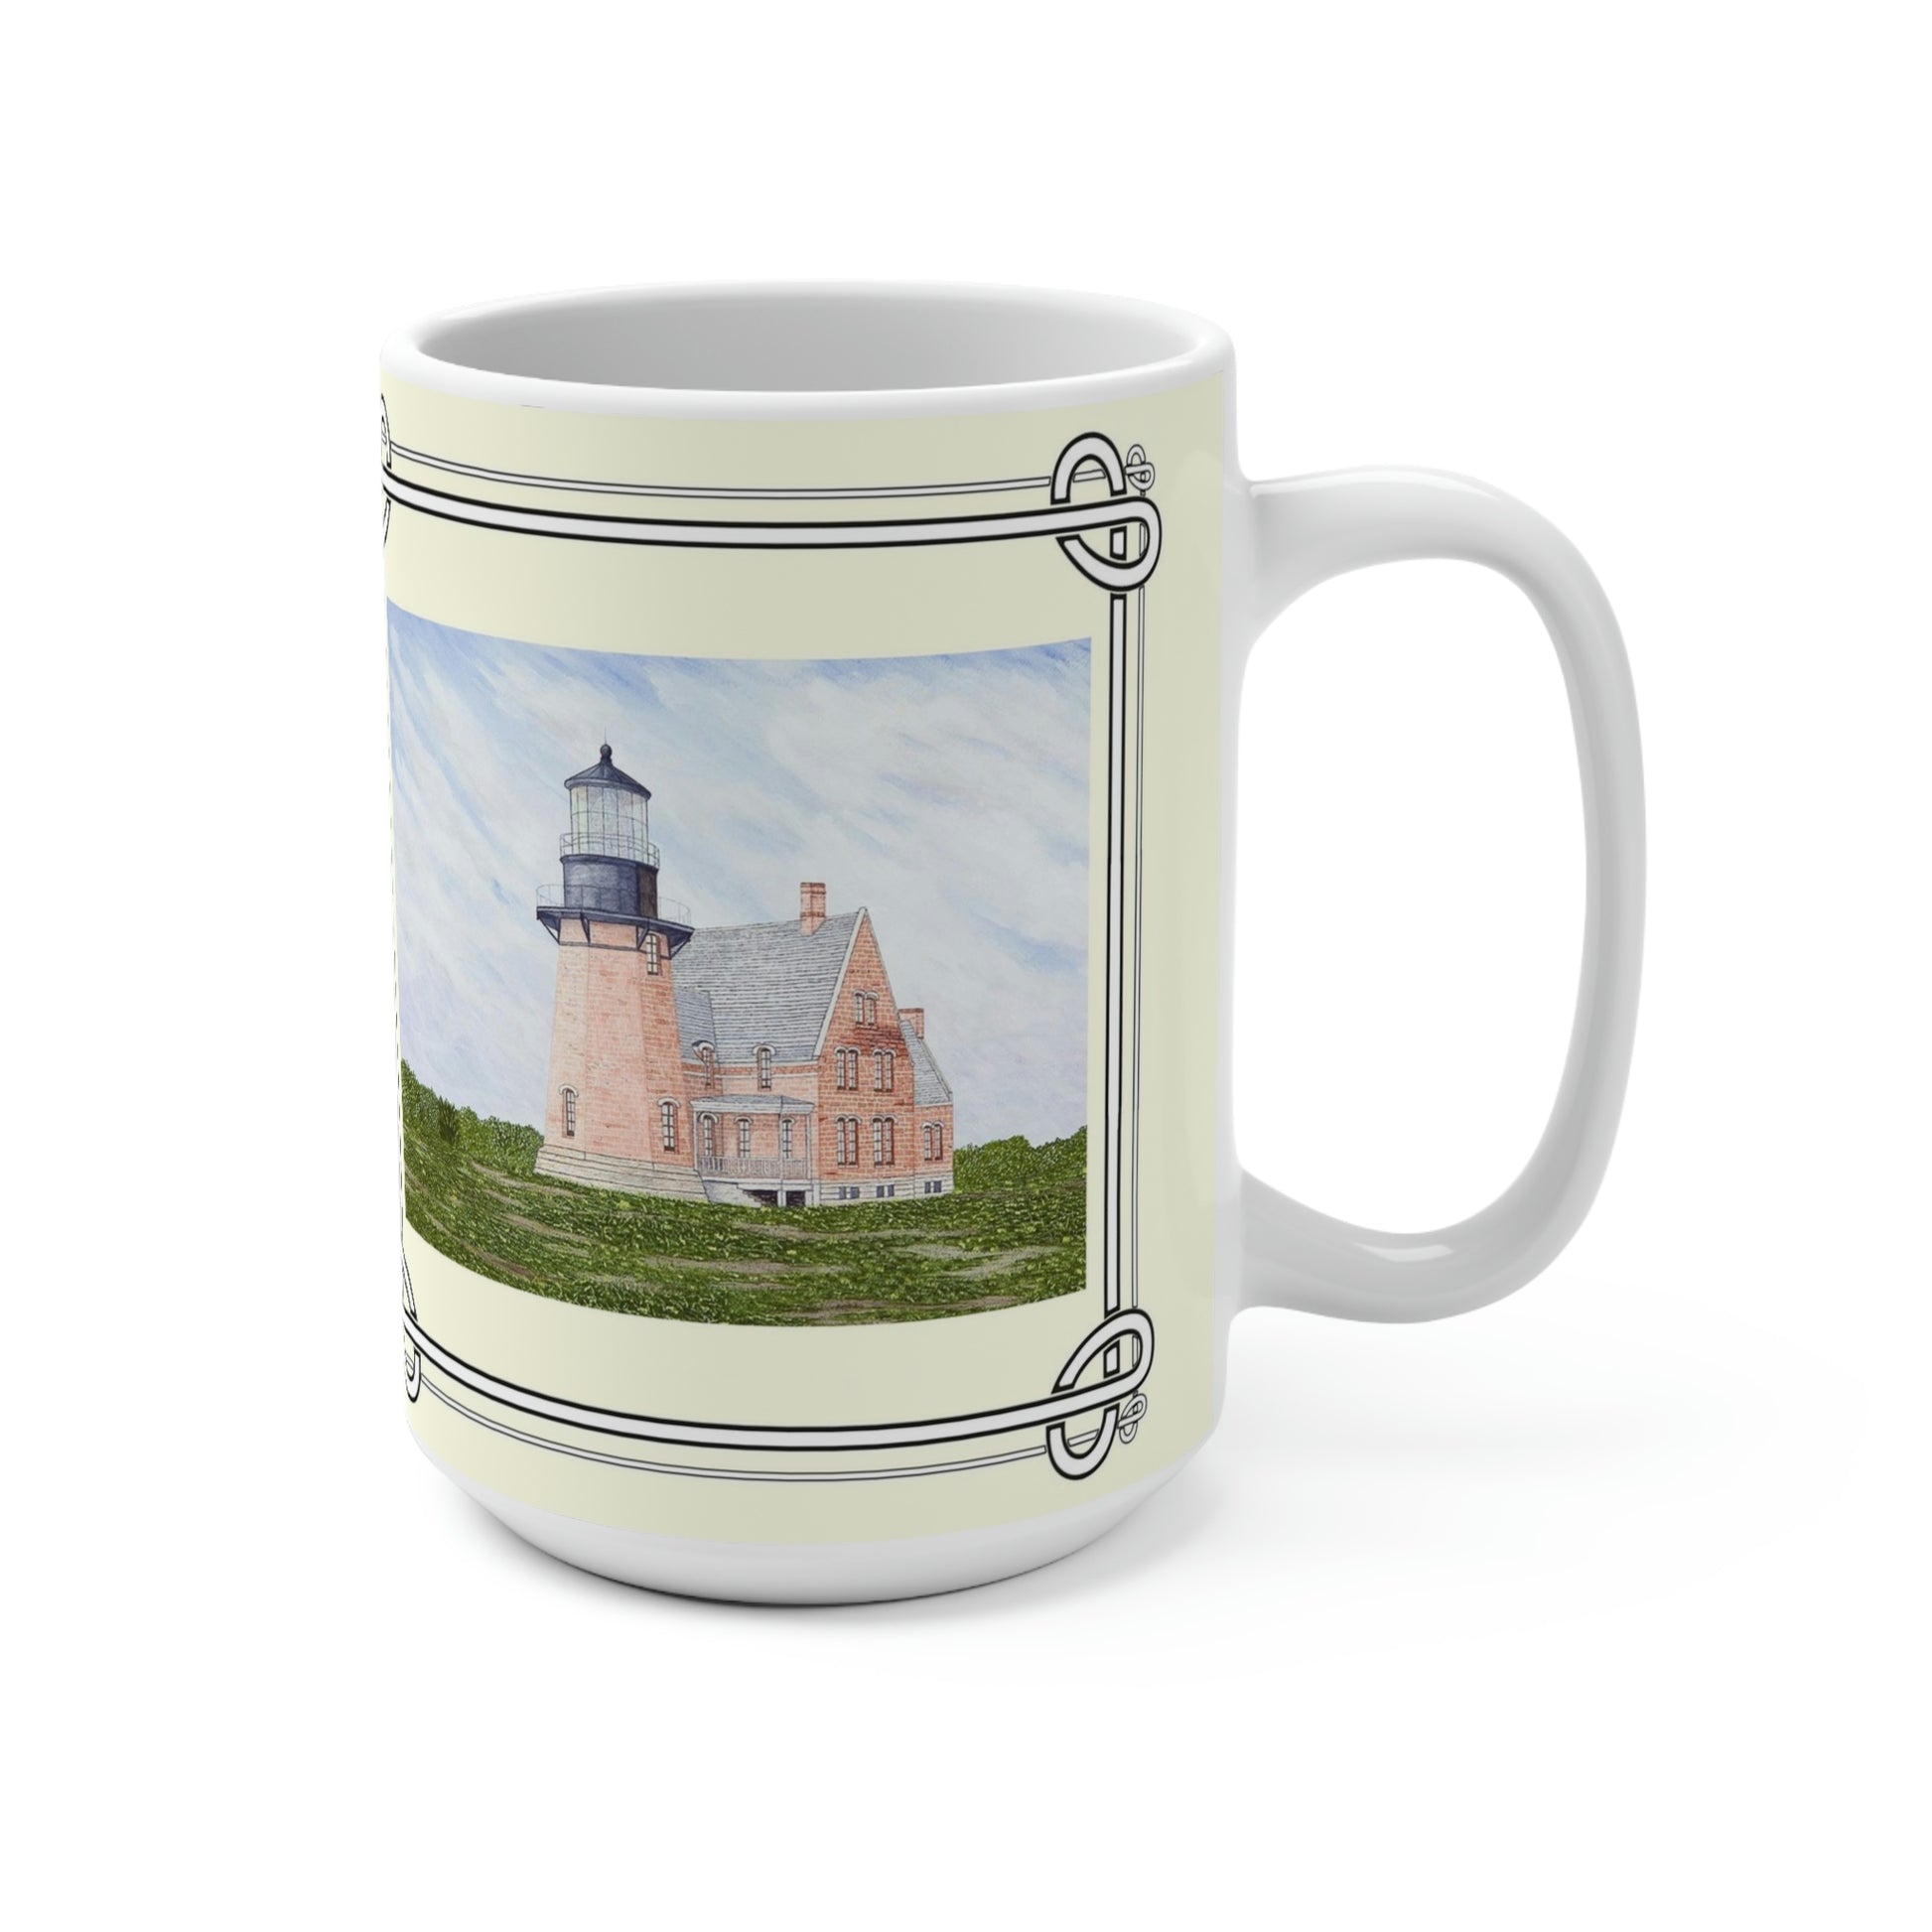 Southeast Light is located atop Mohegan Bluffs on Block Island, Rhode Island. The island is surrounded by submerged rocks and sandy shoals. Built in 1875, the octagonal tower is 67 feet tall. In 1993 the lighthouse was moved 300 feet inland to protect it from erosion.  The mug design is a reproduction of an original watercolor by Lee M. Buchanan and has the image on the front and back of the mug.